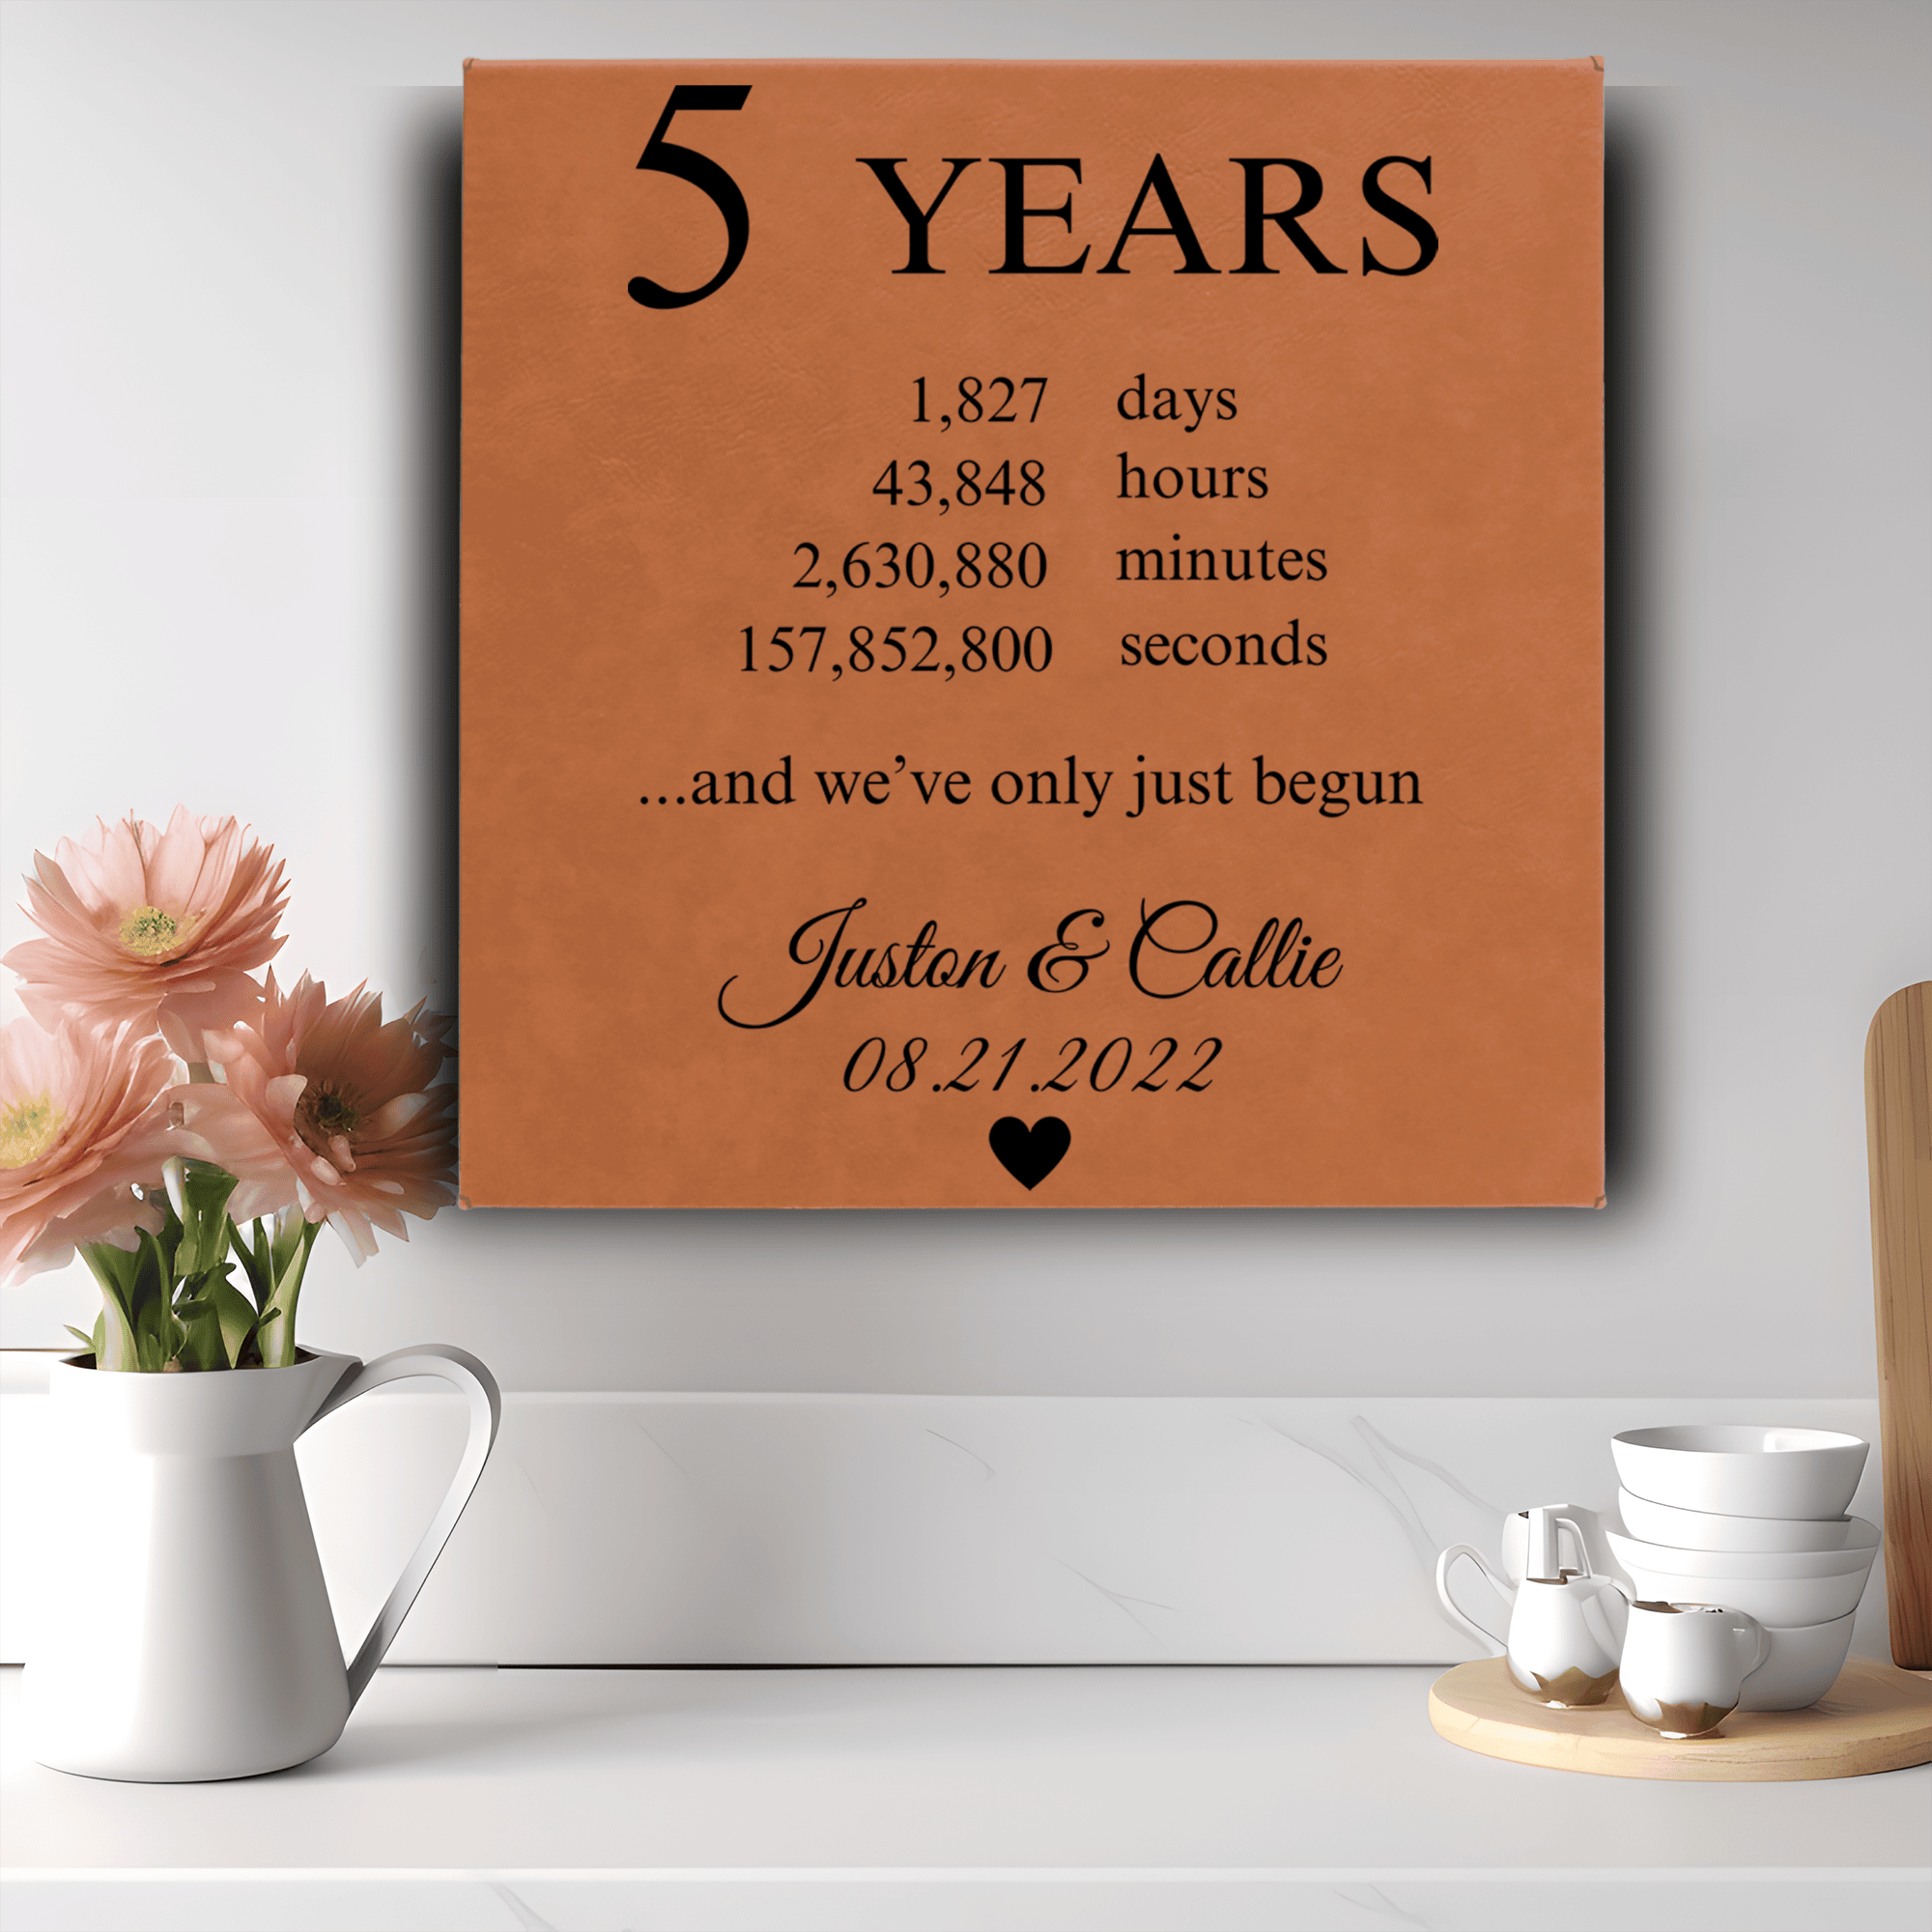 Rawhide Leather Wall Decor With 5 Year Anniversary Design